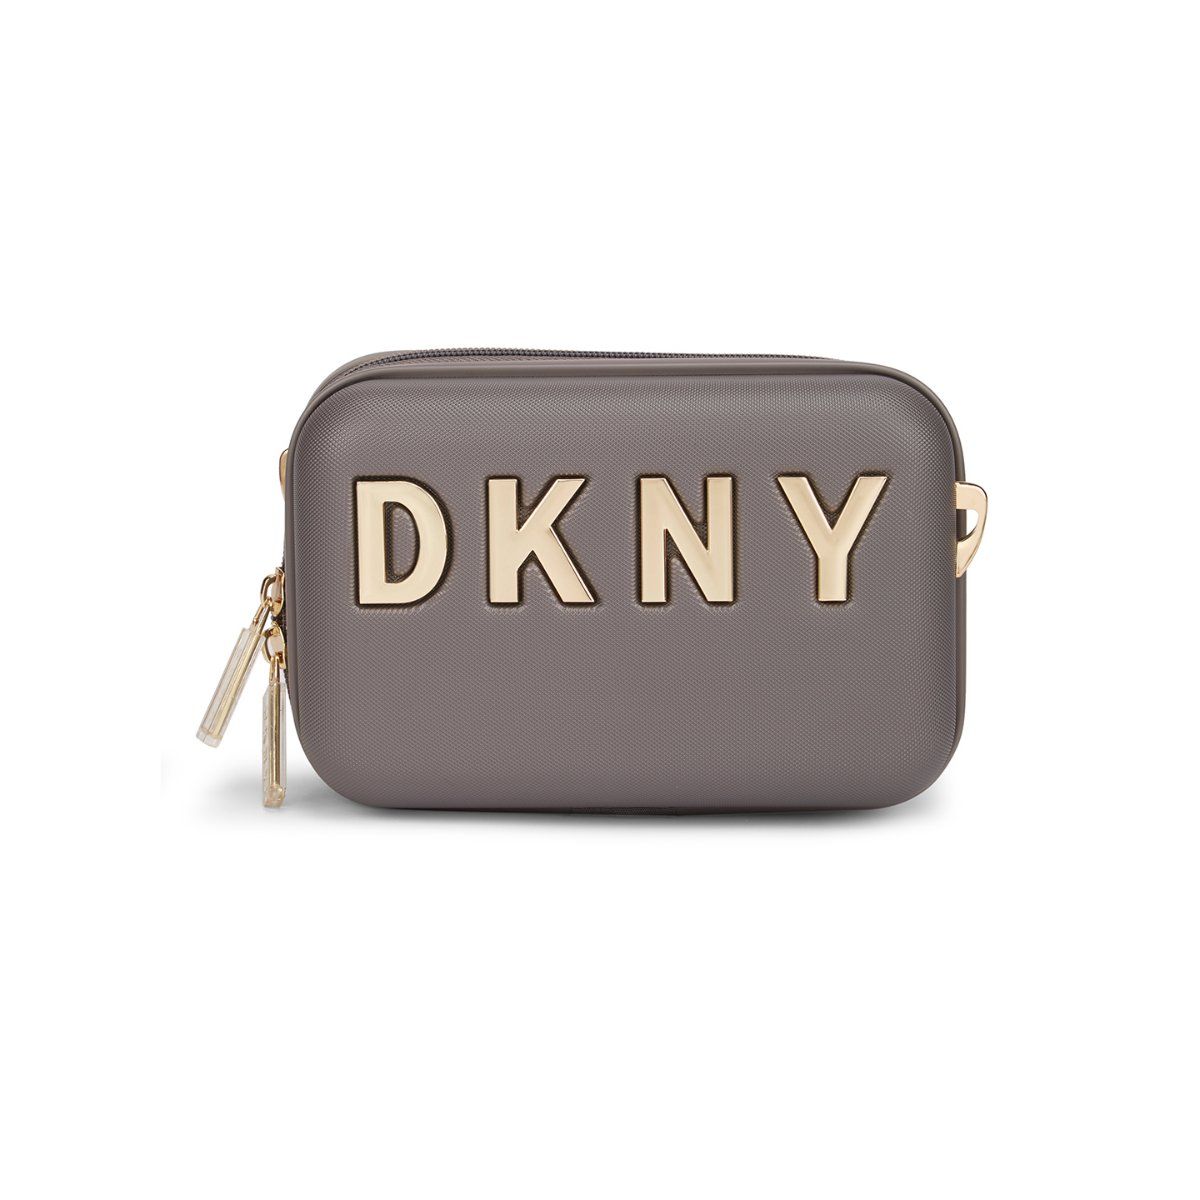 DKNY PURSE Donna Karan Accessory D K N Y Monogram for Her Collectable Made  in USA. - Etsy Ireland